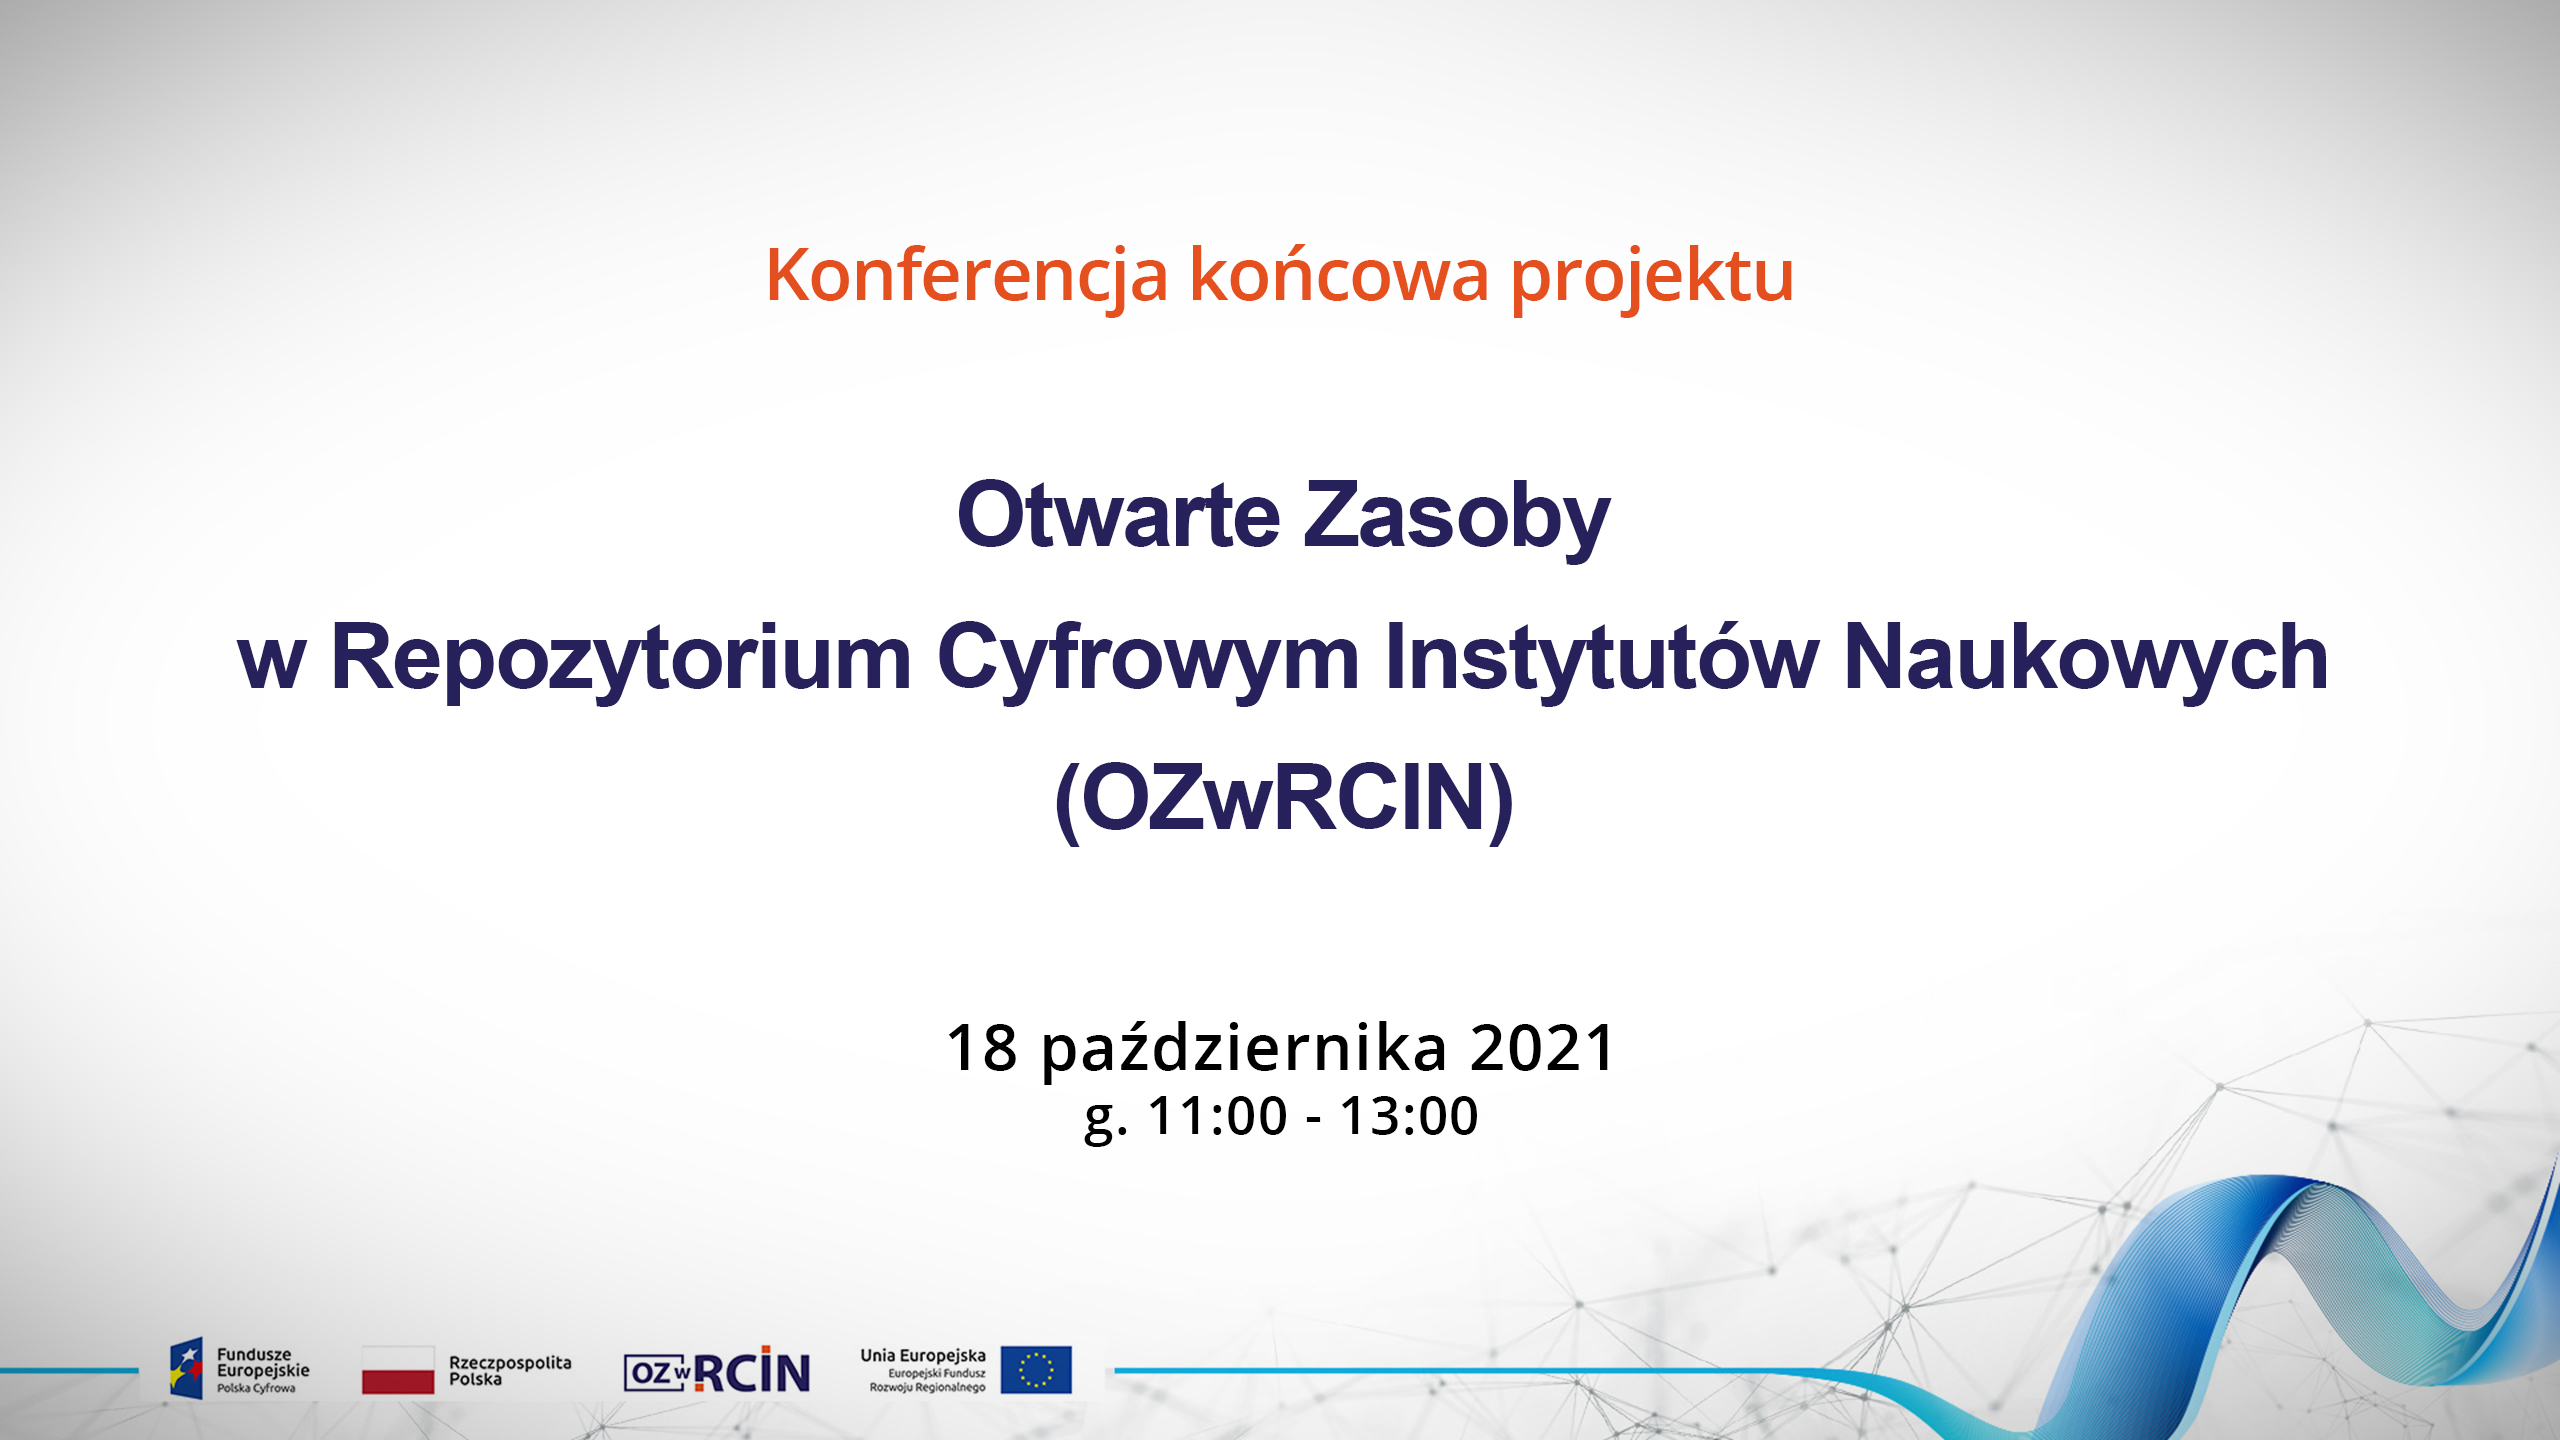 Final conference of the OZwRCIN project